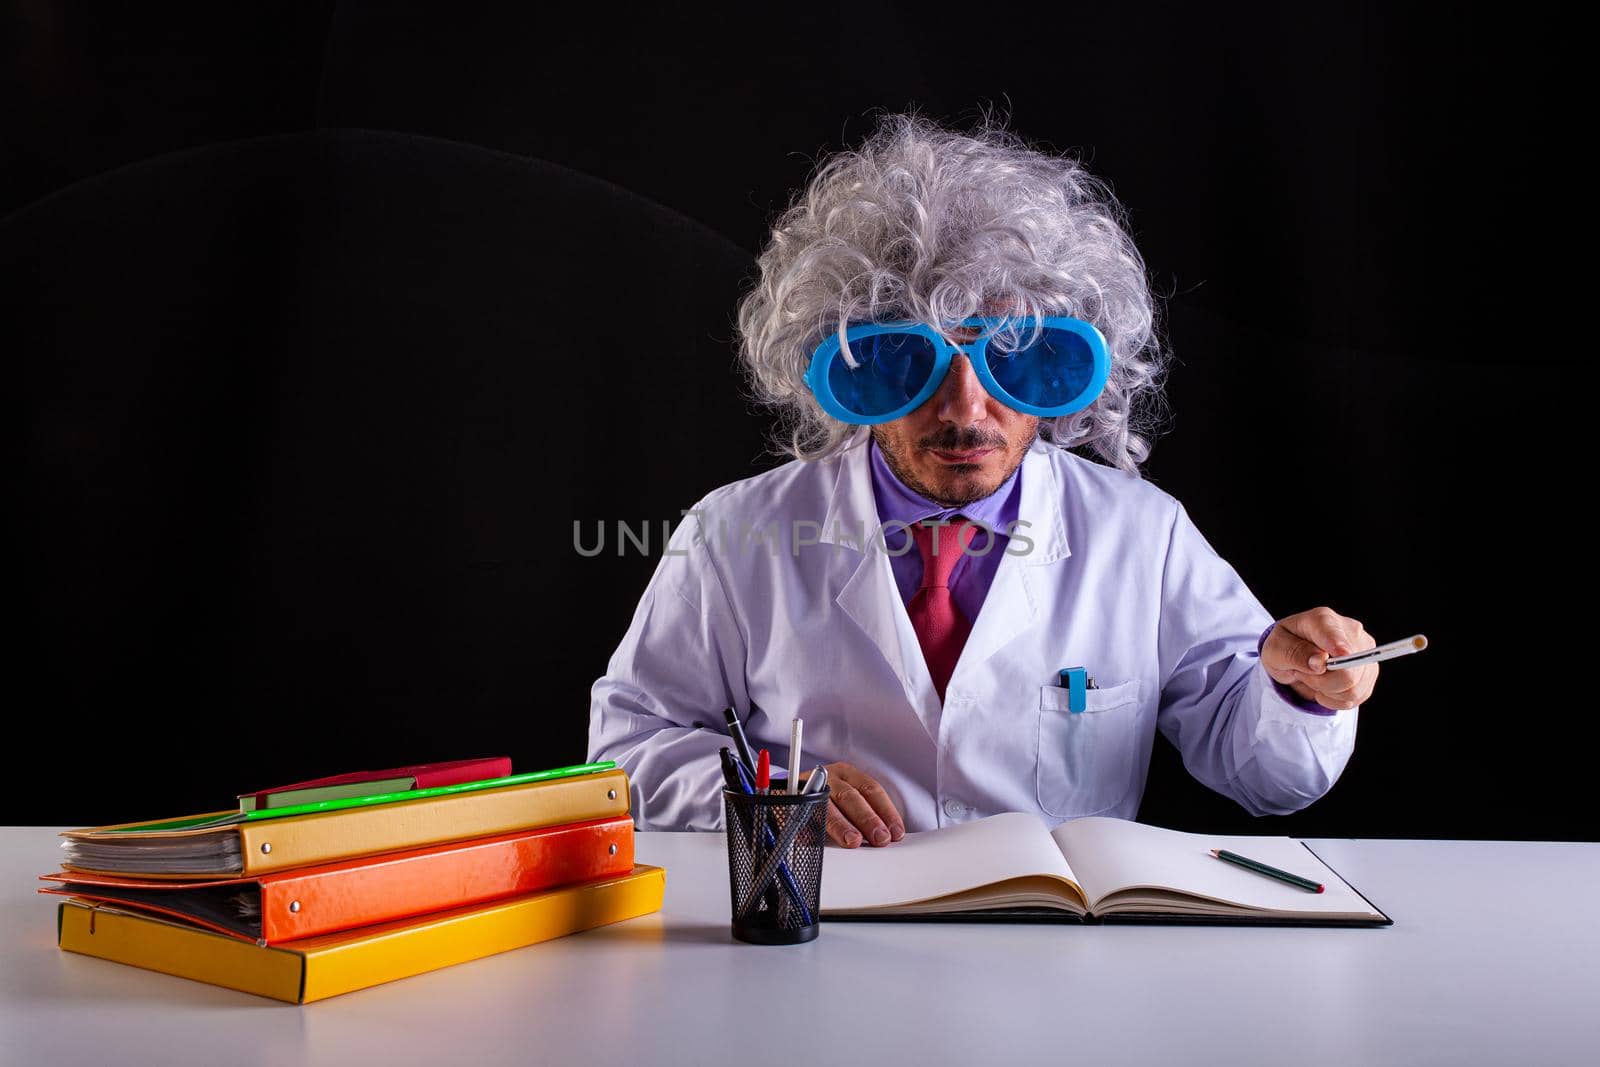 Crazy science teacher in white coat with unkempt hair in funny eye glasses sitting at the desk